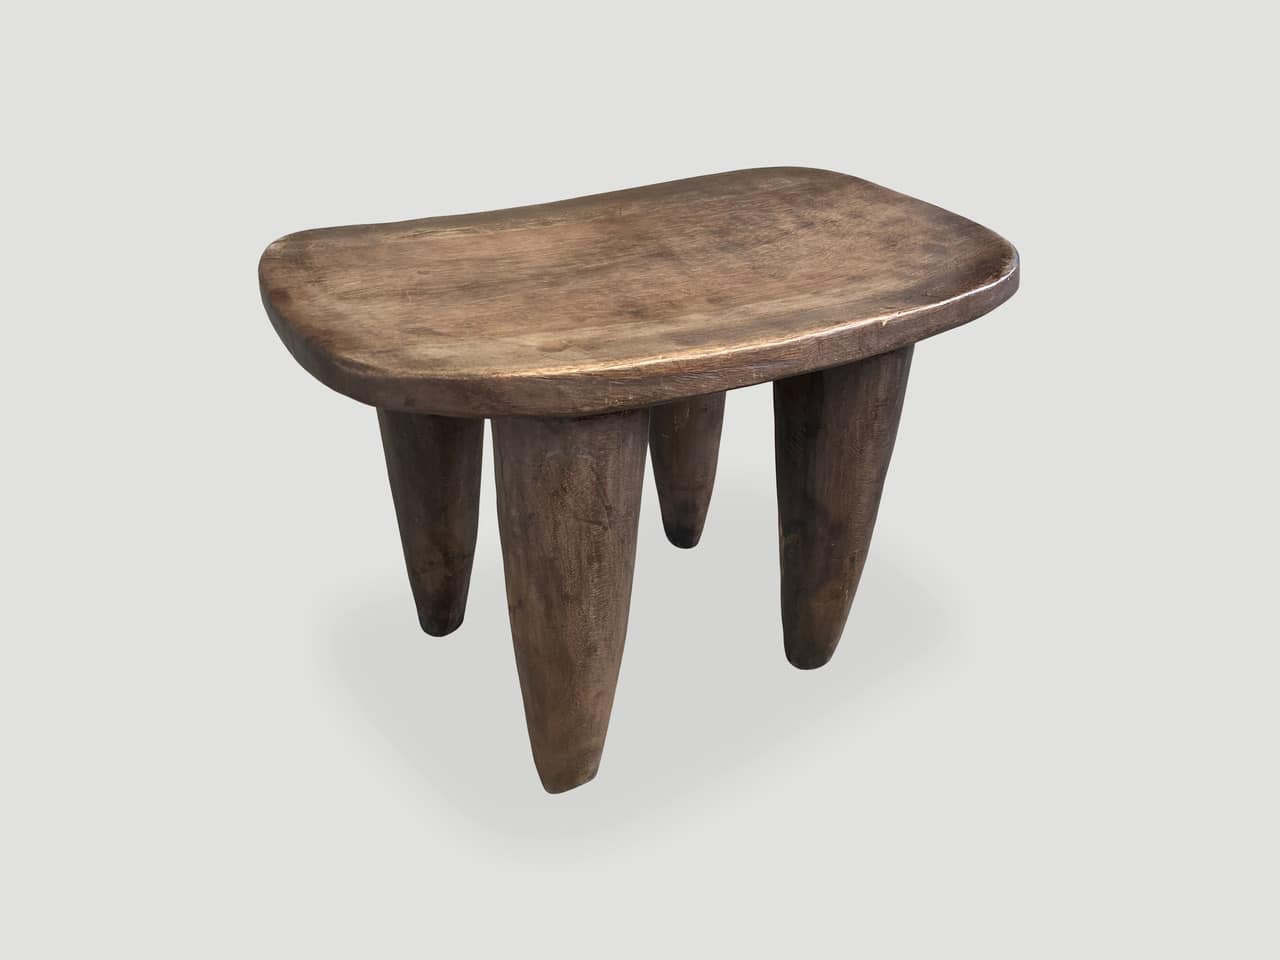 Senufo side table or stool from the ivory coast